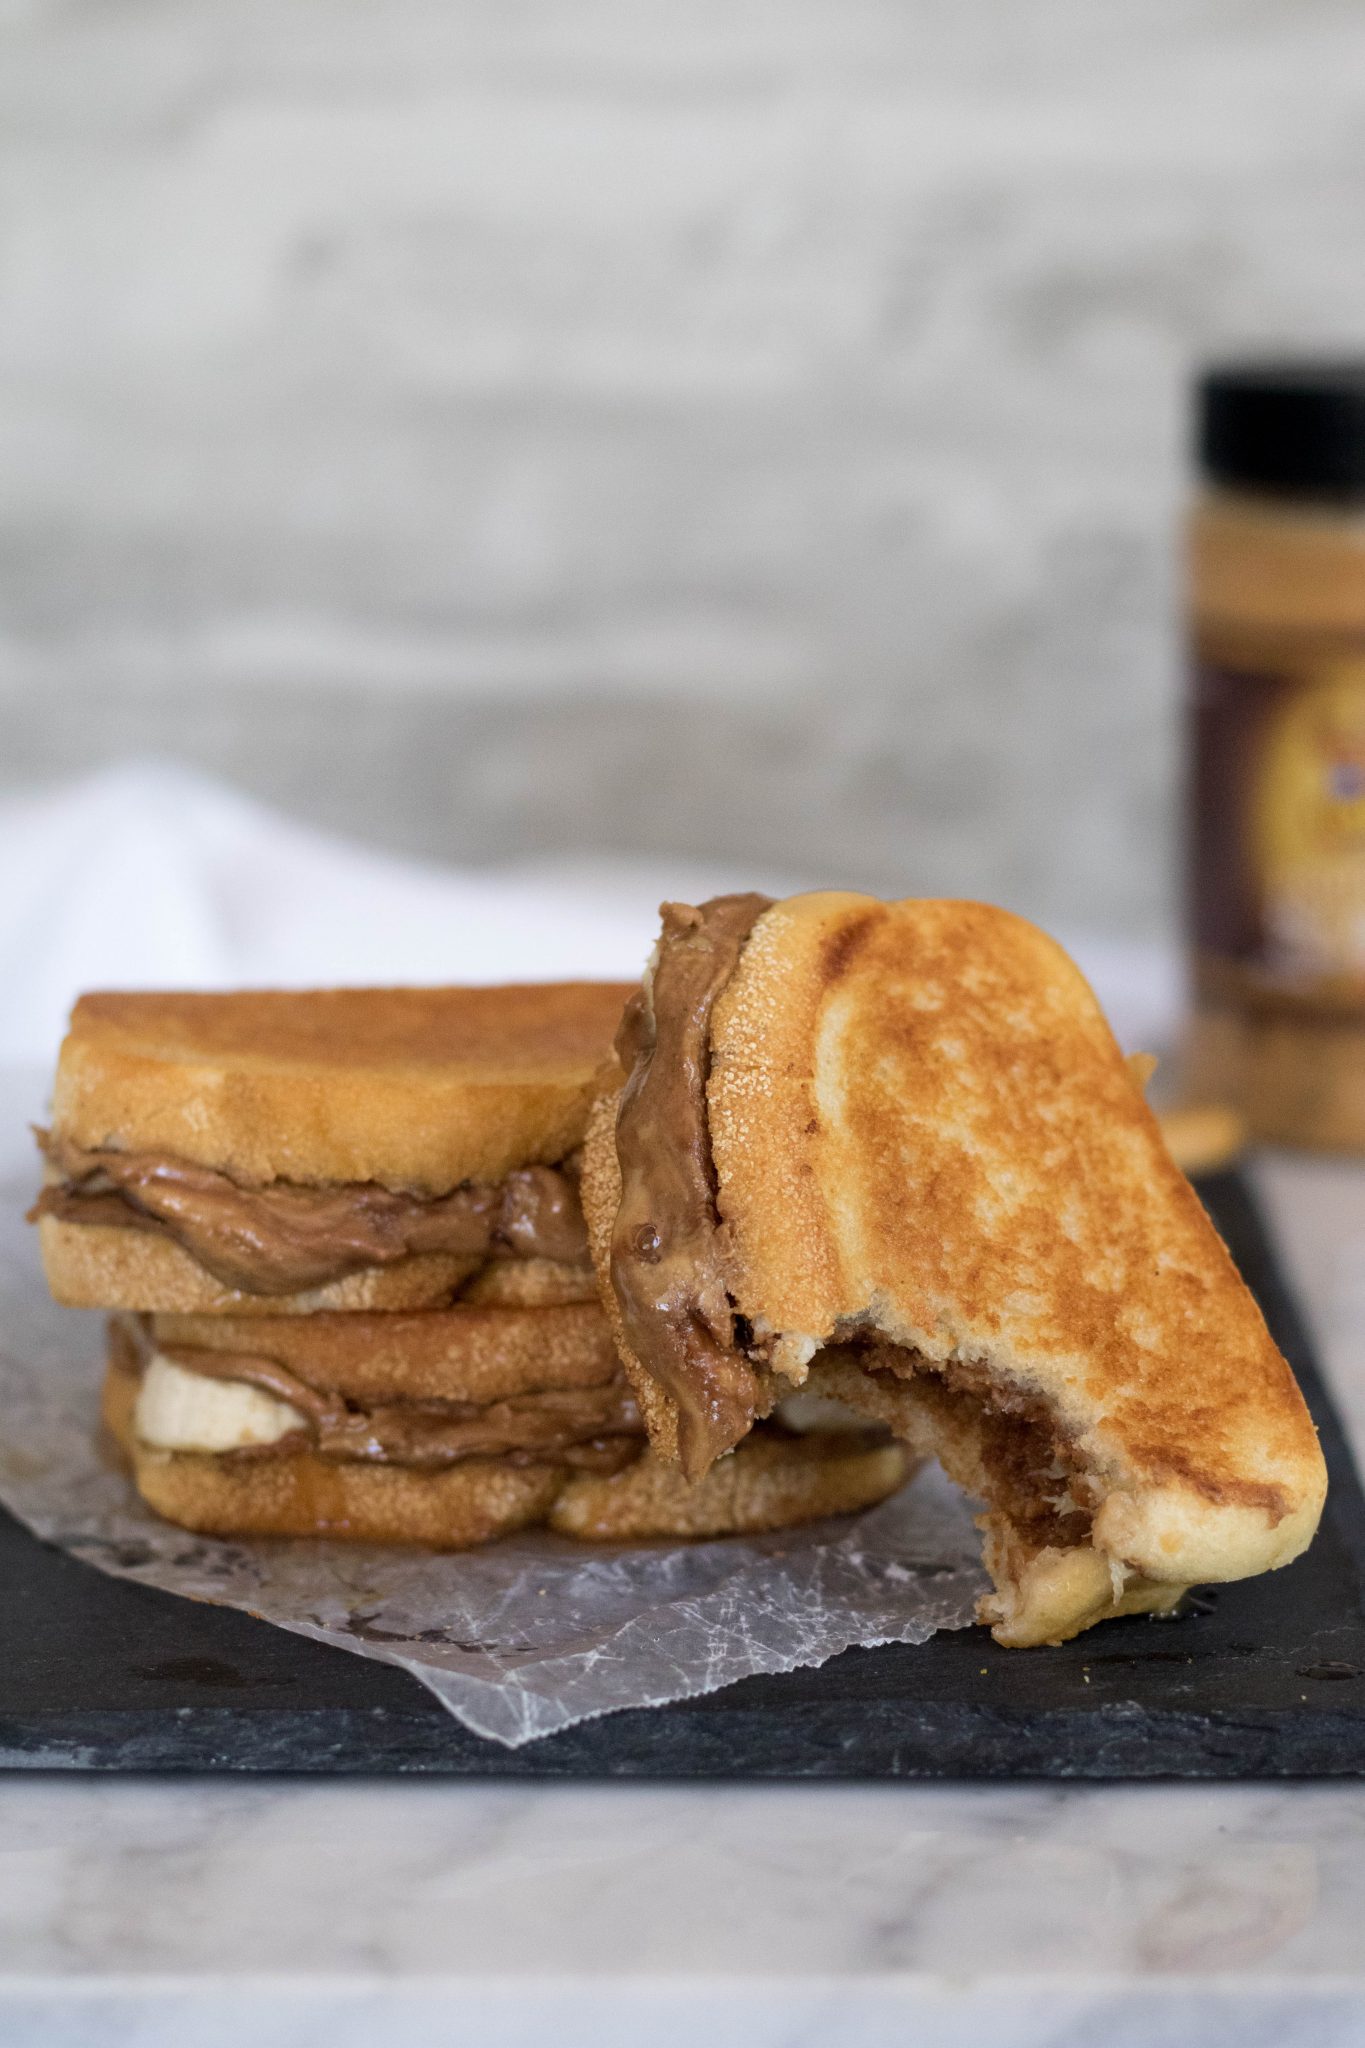 Grilled Peanut Butter Banana Sandwich - Lifestyle of a Foodie